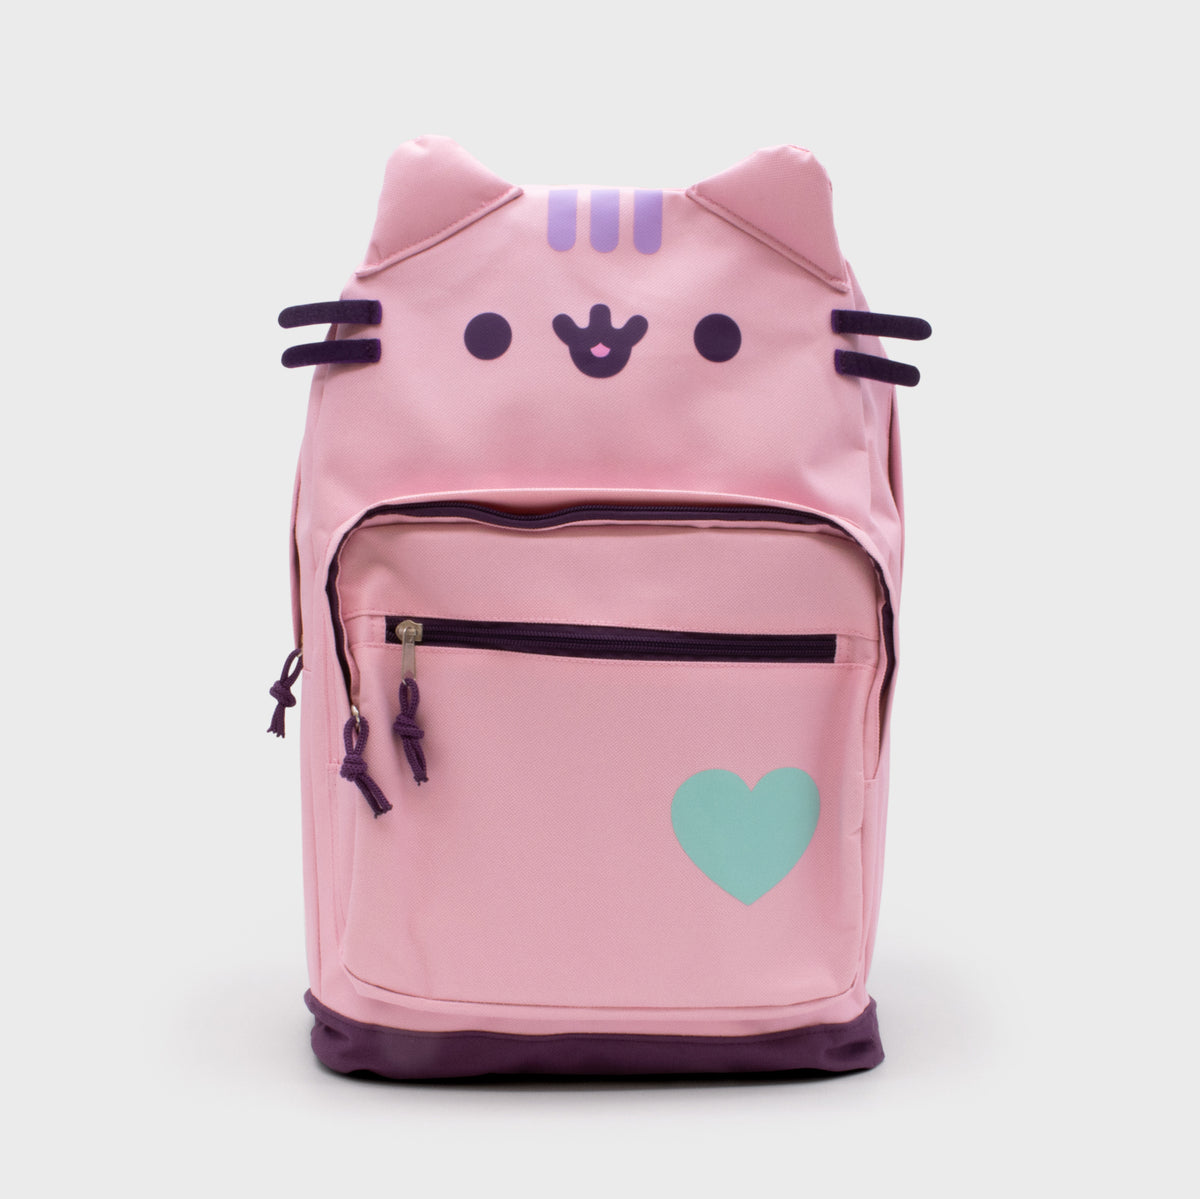 Pusheen - Pink Character Backpack | CultureFly